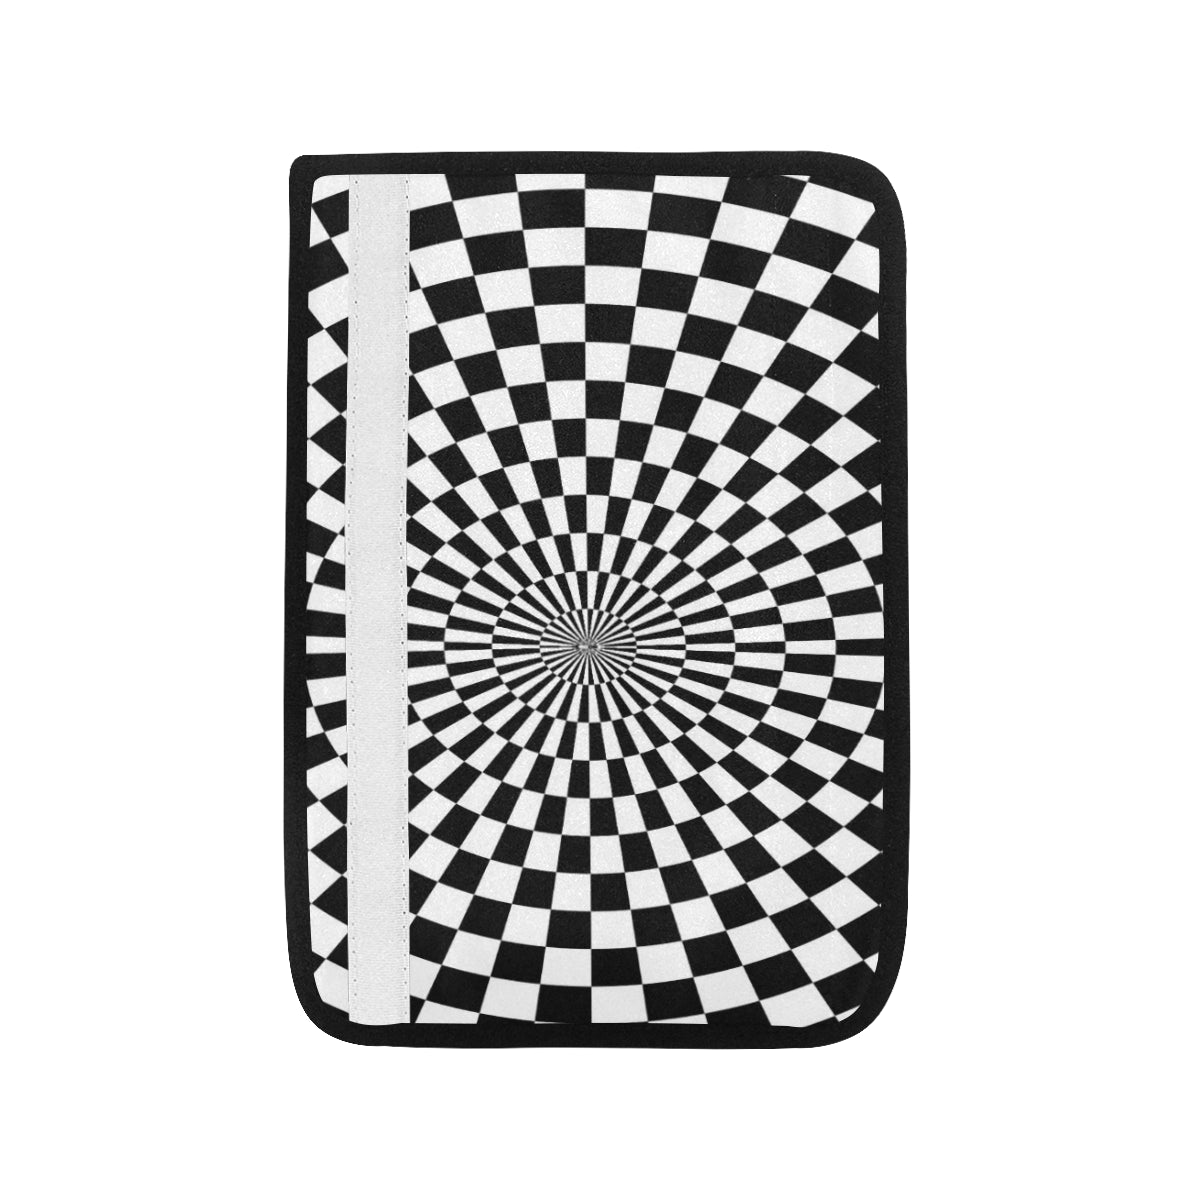 Checkered Flag Optical illusion Car Seat Belt Cover